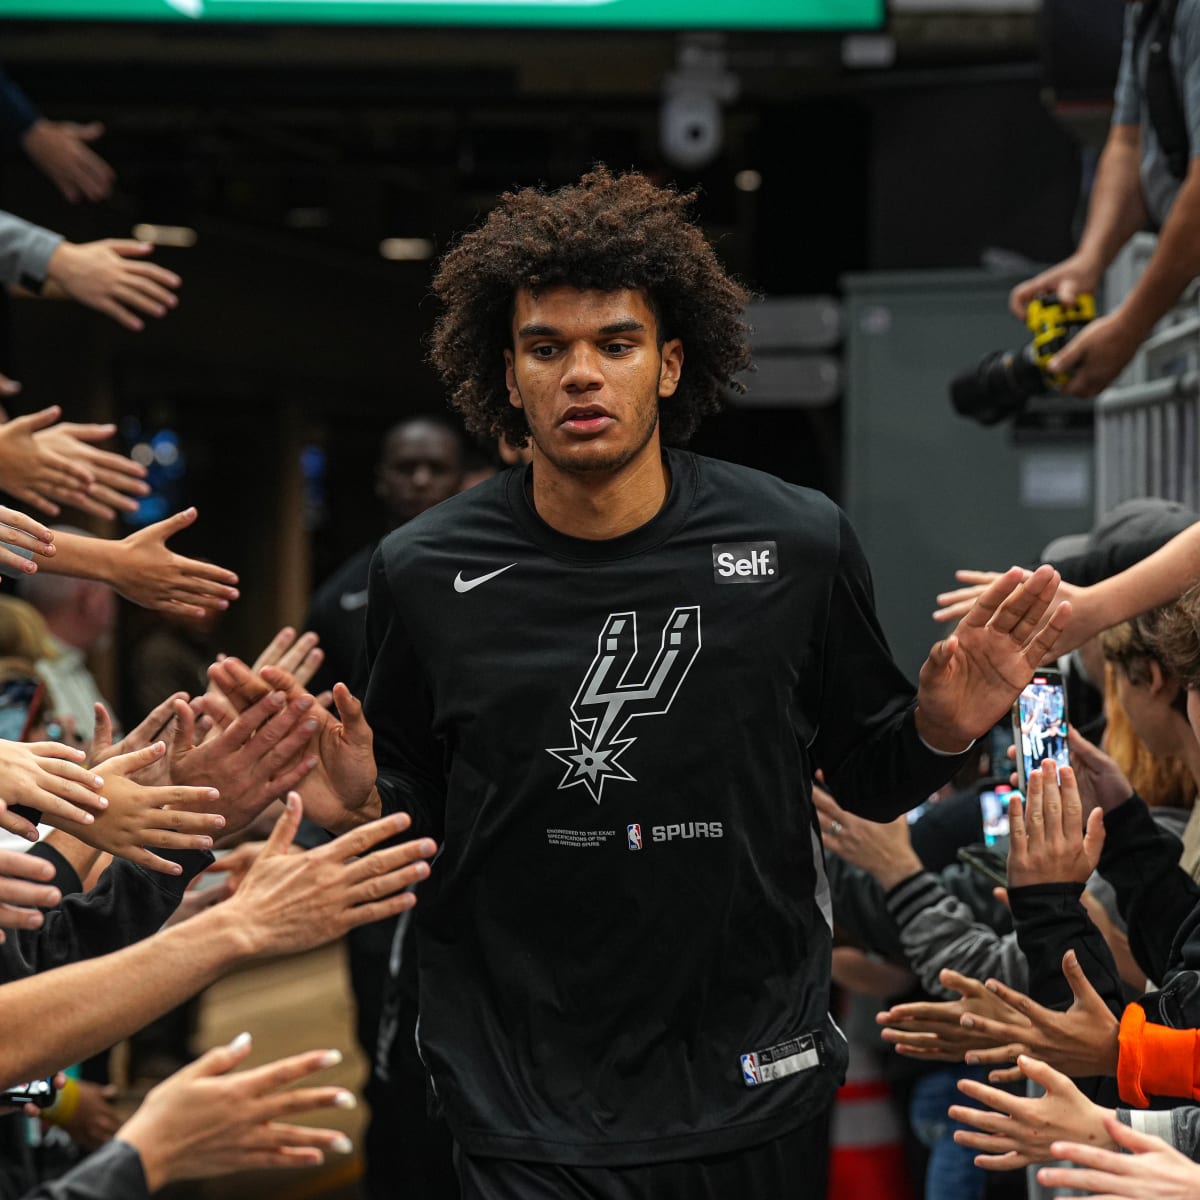 Dominick Barlow, with mom's support, took unconventional route to Spurs